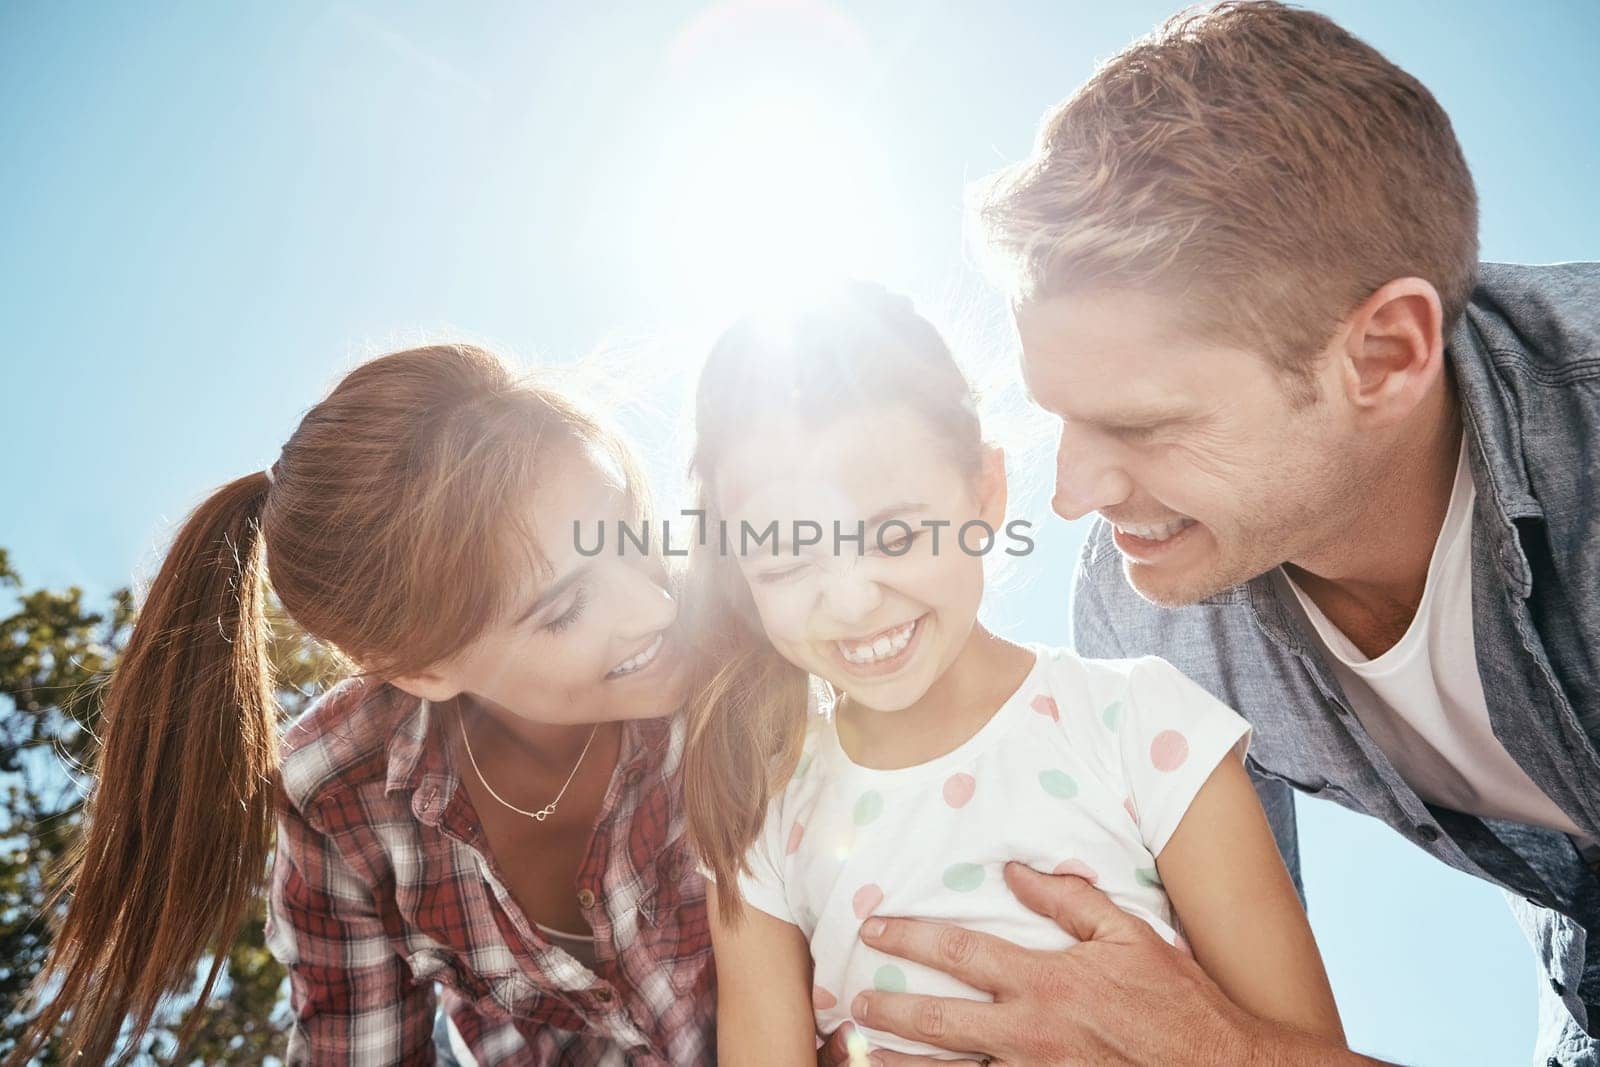 Enjoying some bright moments. a family bonding together outdoors